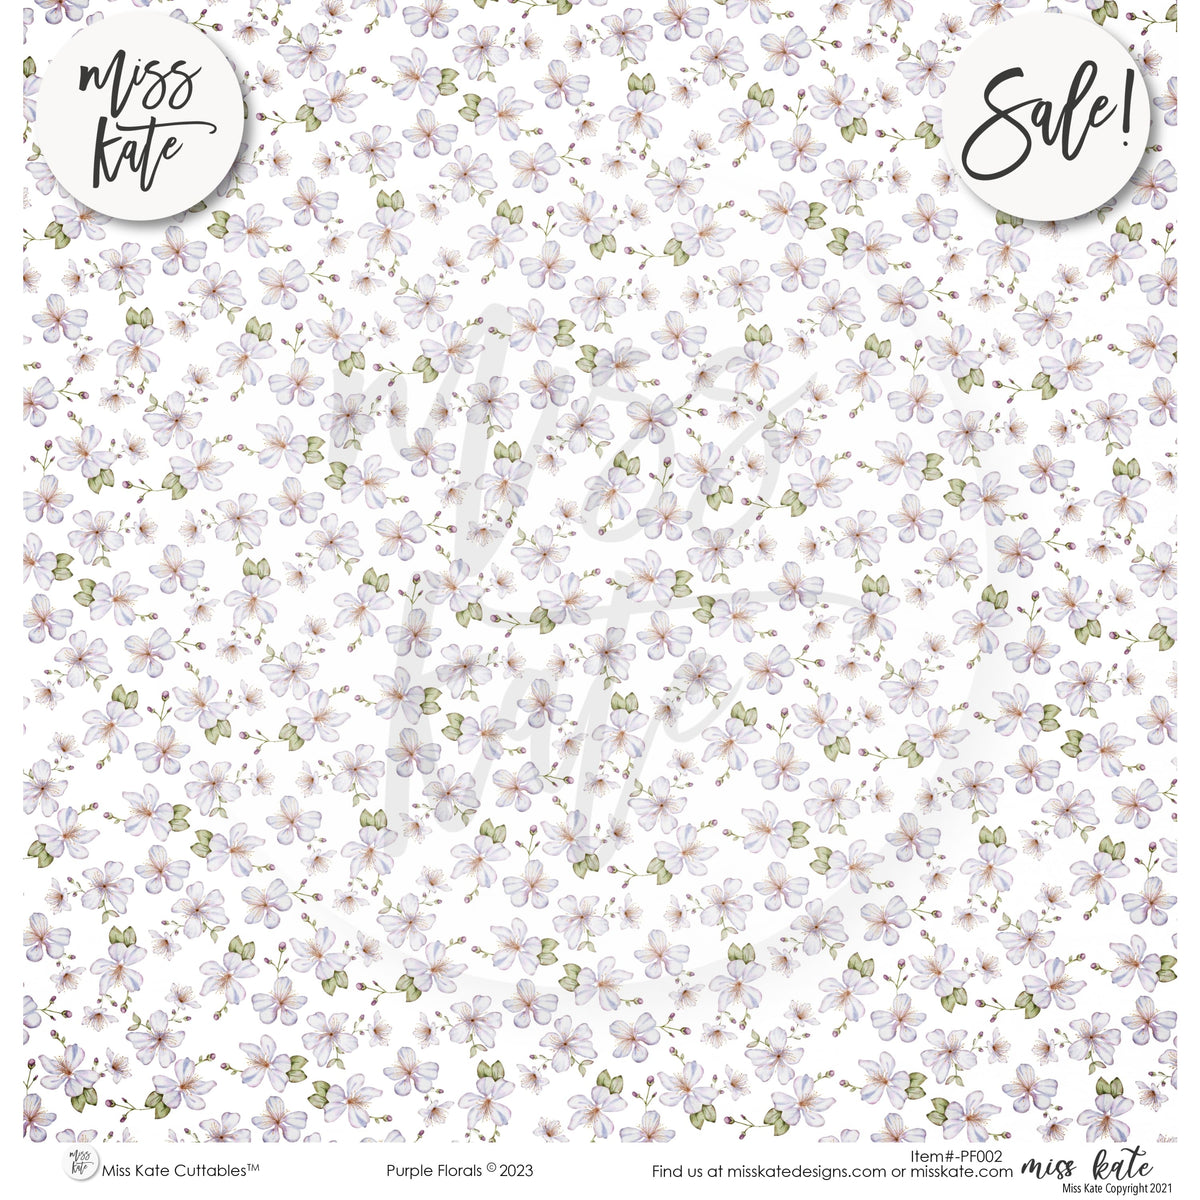 Pastel Florals - Mint Tissue Paper (3 Sheet Pack 13.8 x 13.8 Inches Each) by The Purple Painted Lady